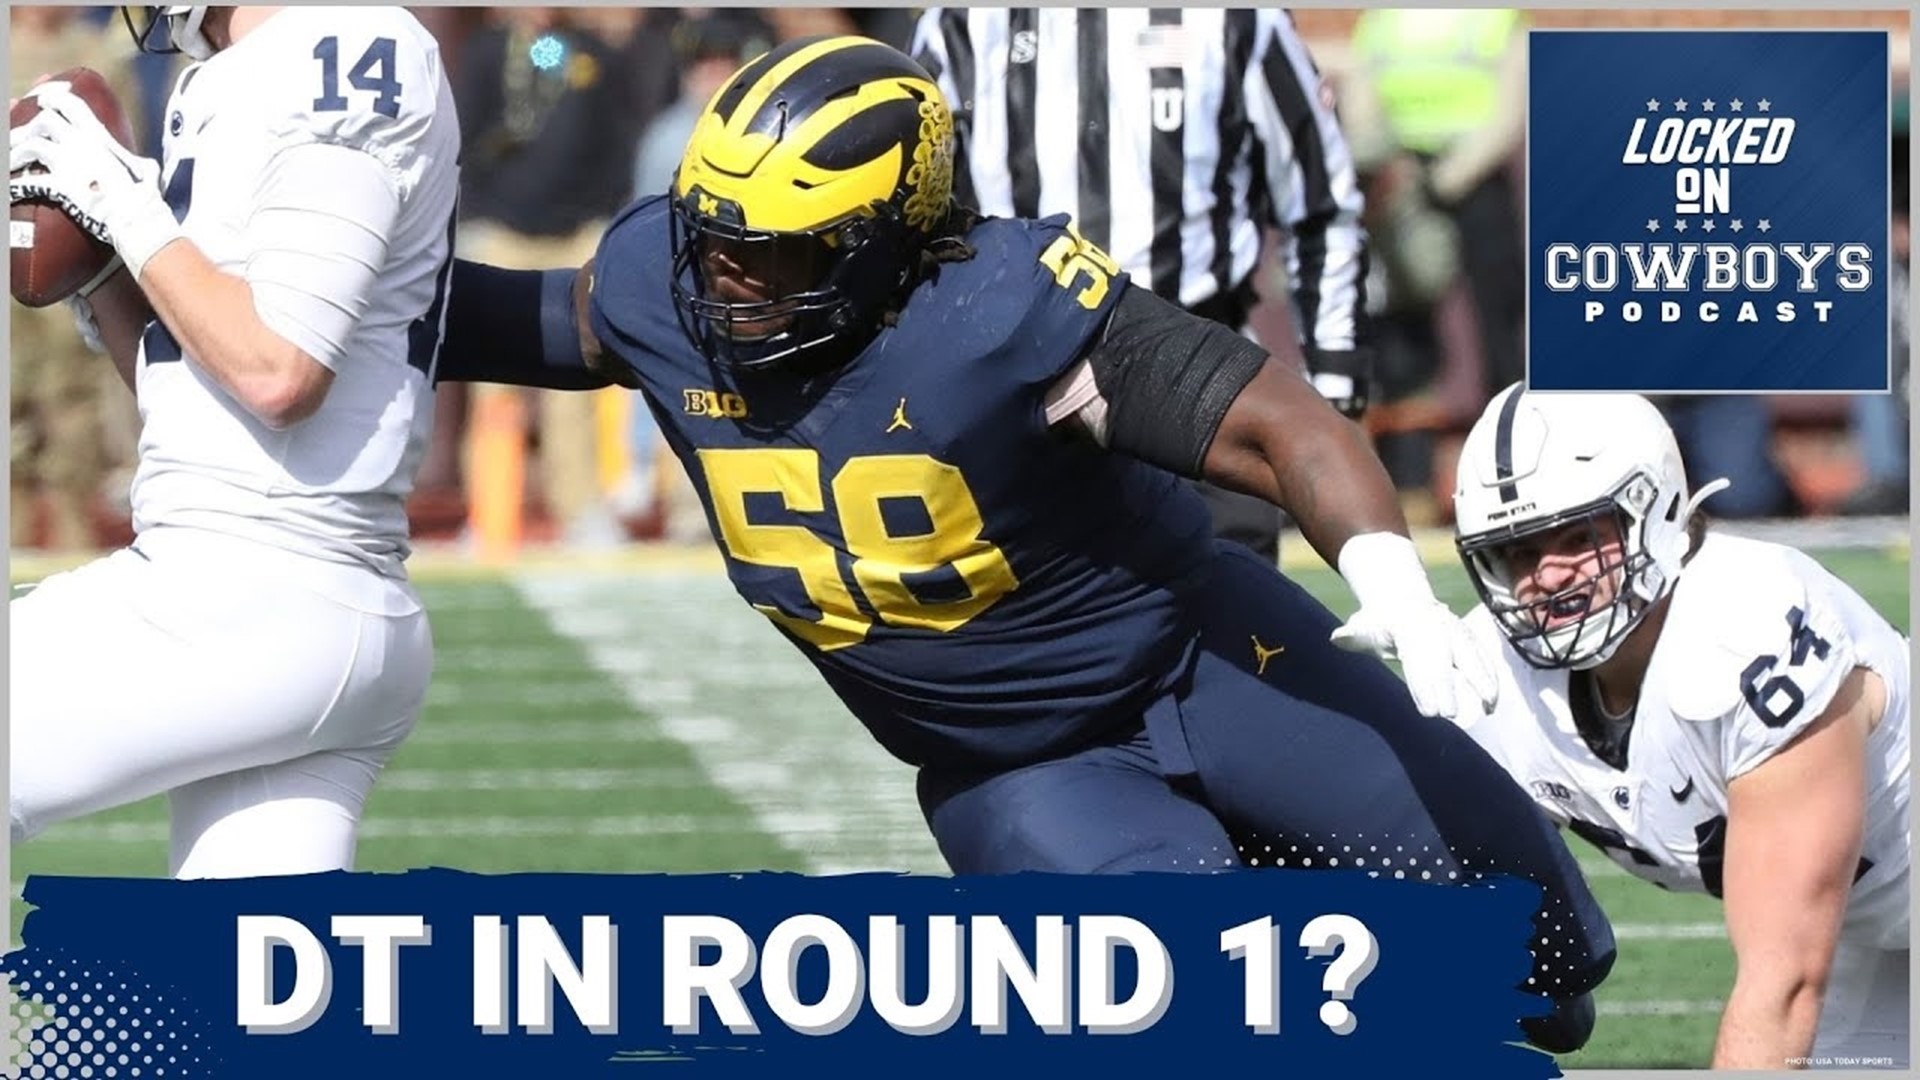 Marcus Mosher and Landon McCool discuss three potential Round 1 defensive tackle options for the Dallas Cowboys. They debate if Bryan Breese would make sense.